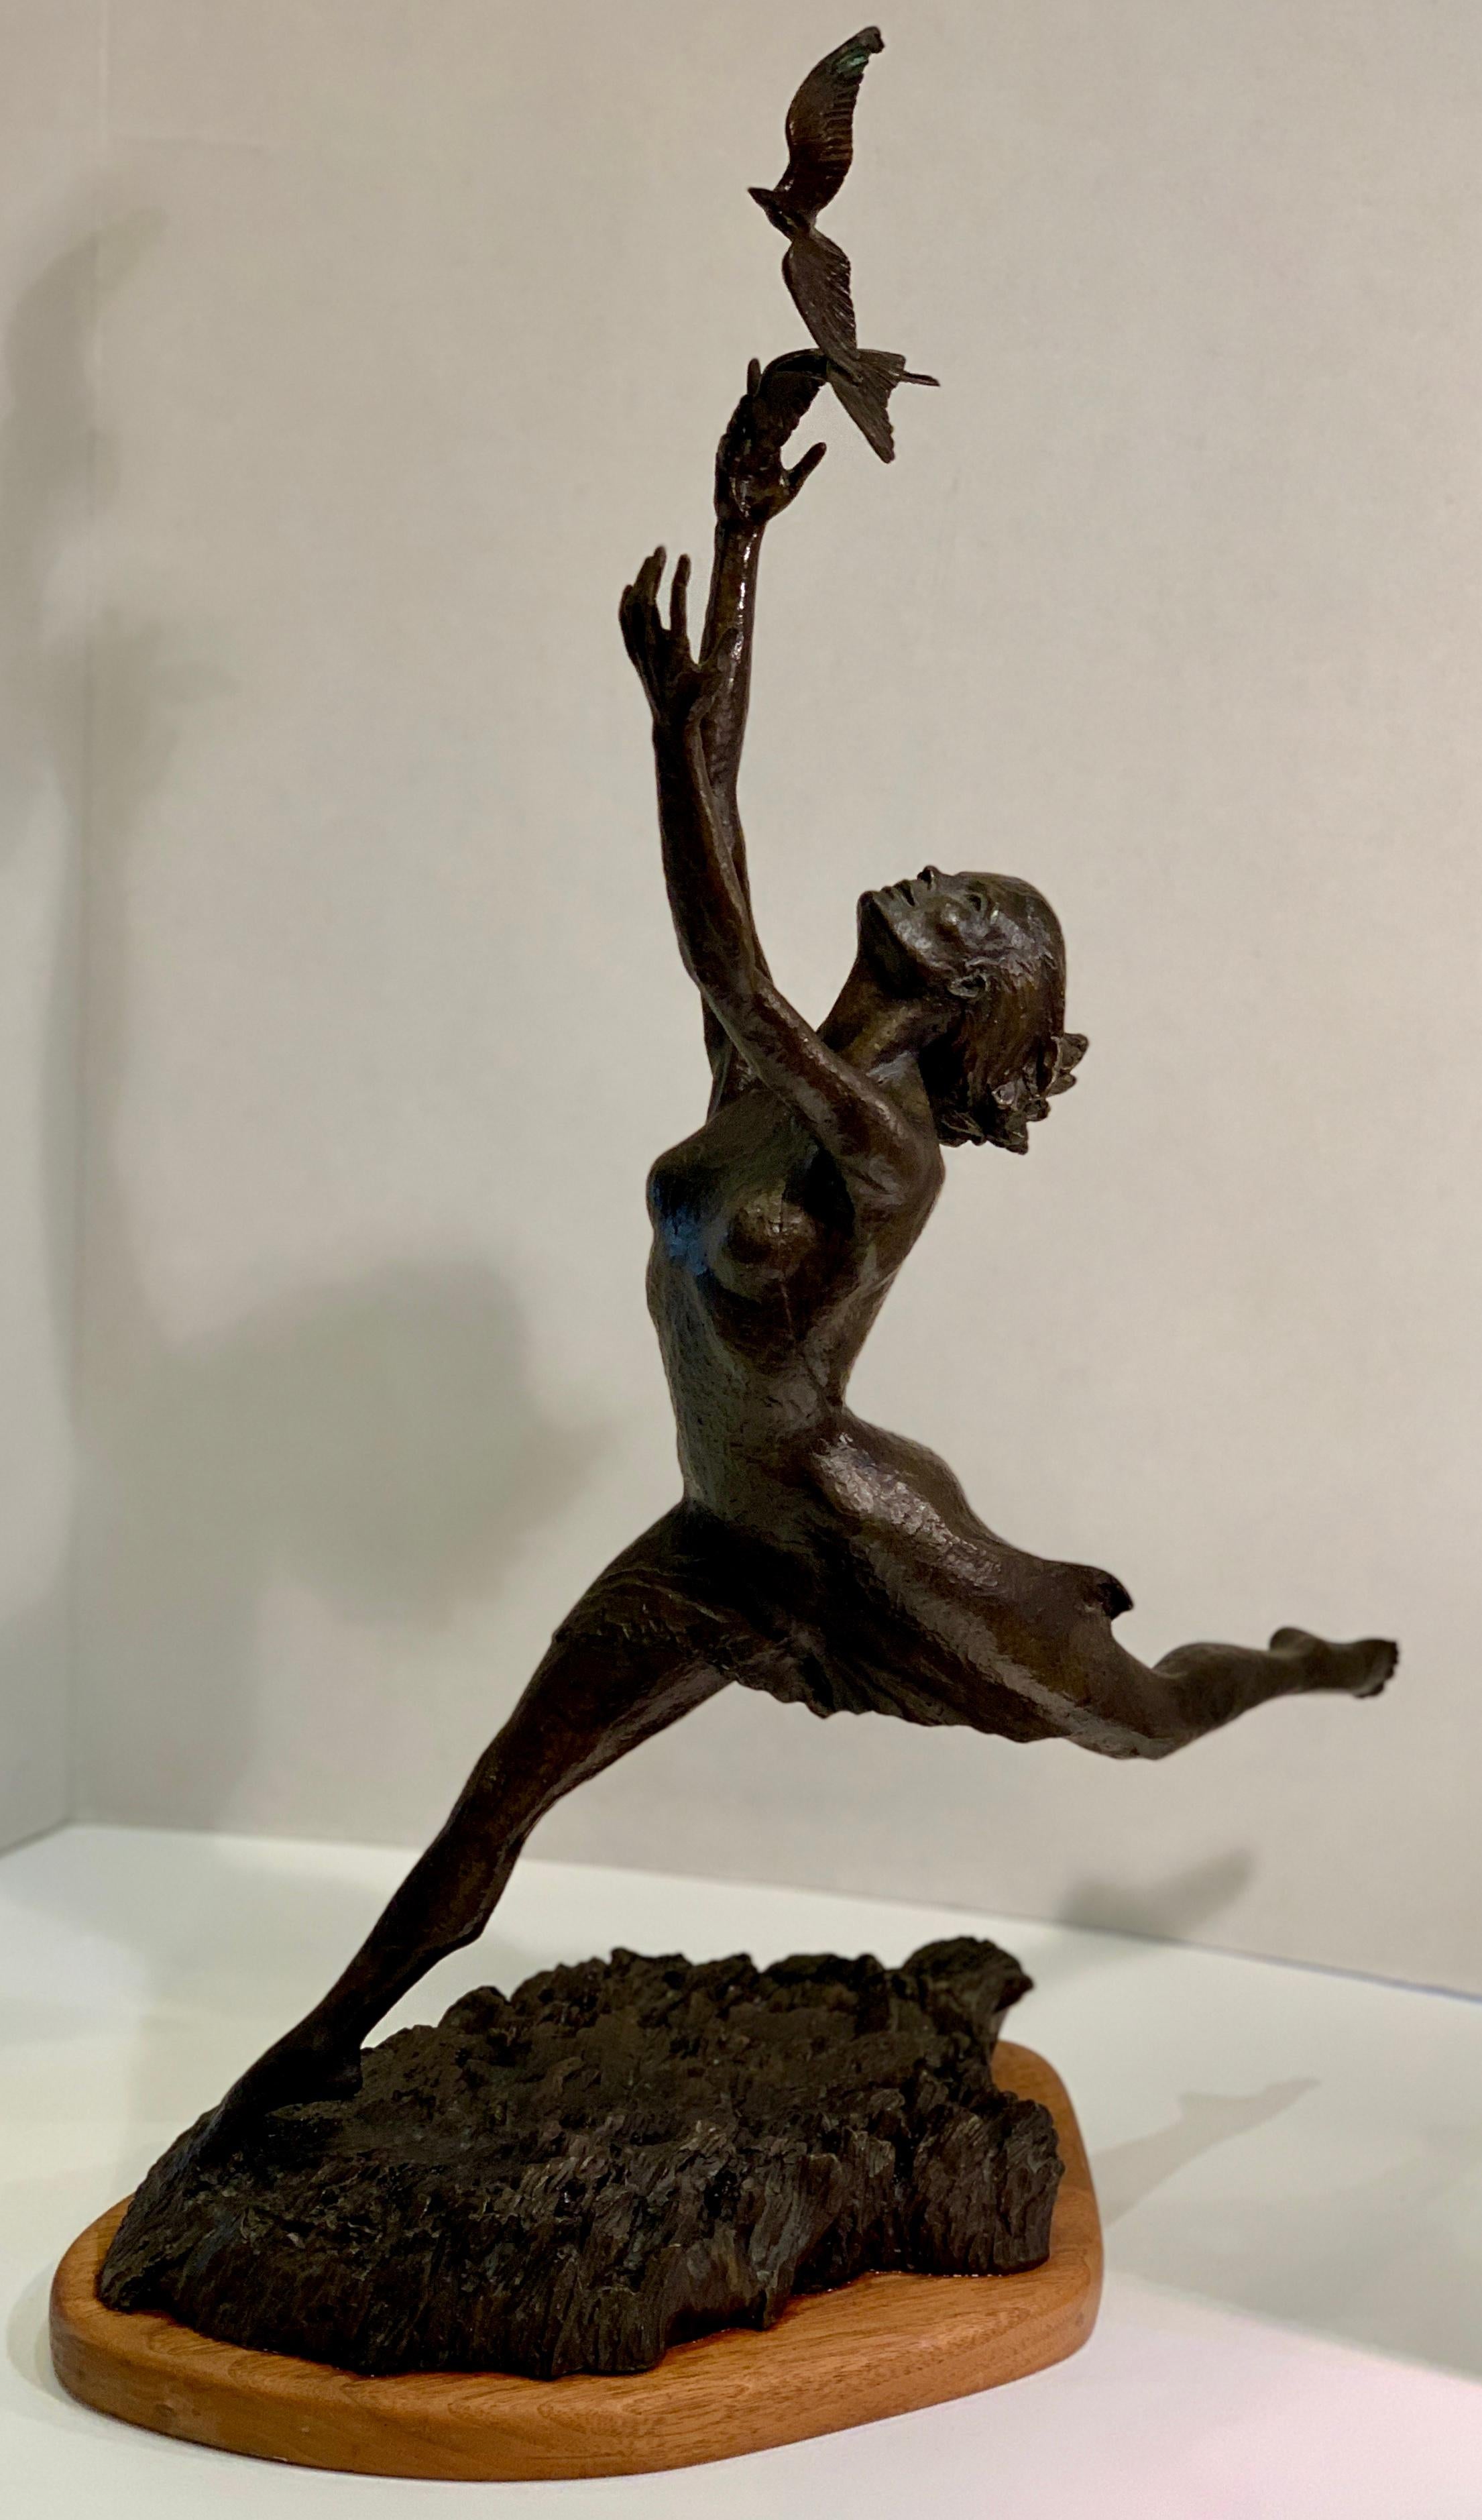 American Art Deco Style Bronze Sculpture of a Woman Reaching for Seagulls by M. Young